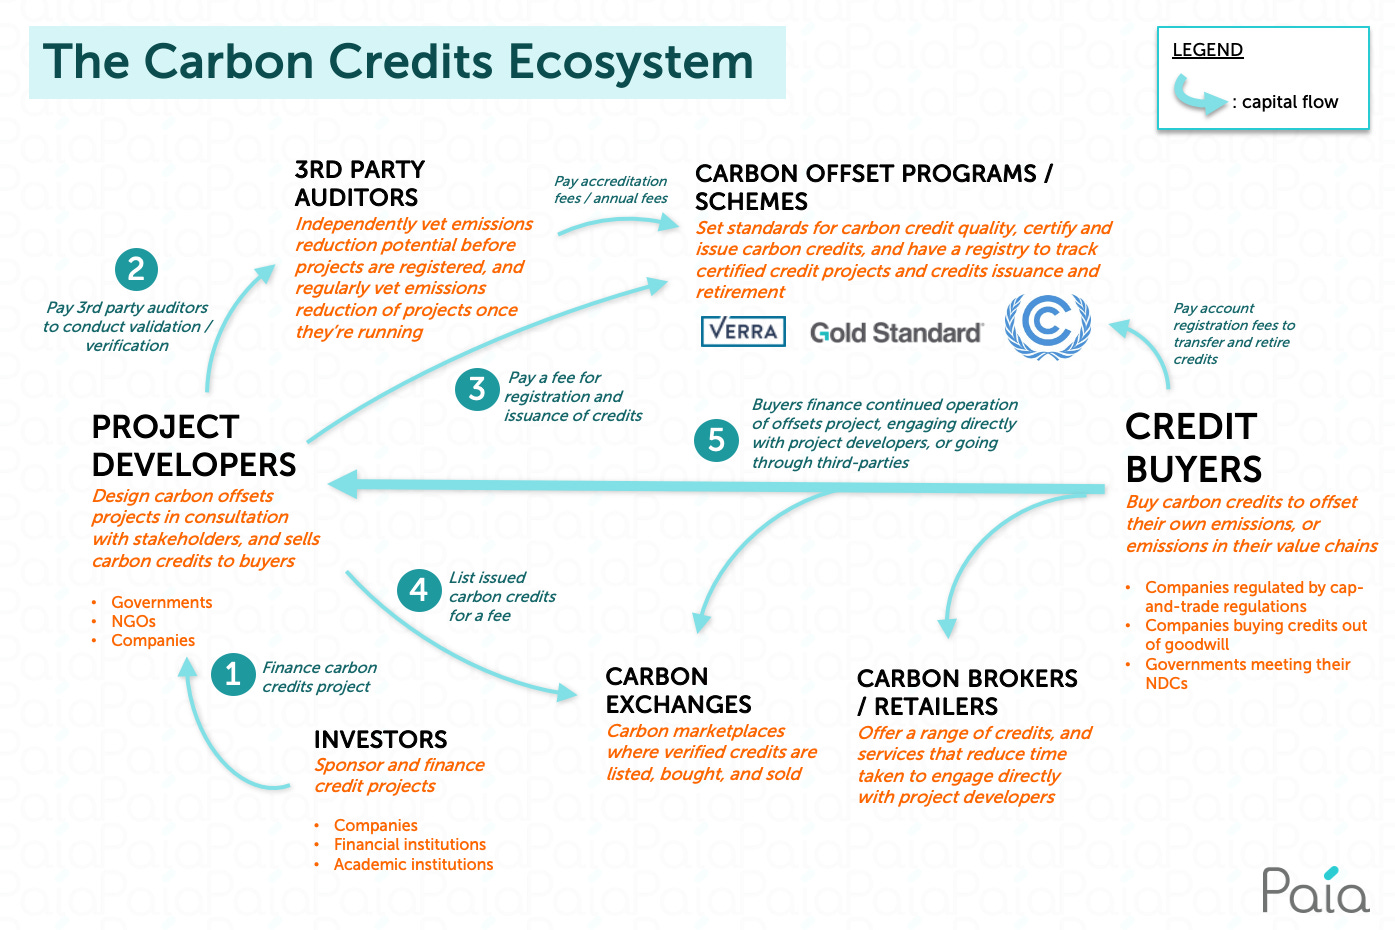 The Carbon Credits Ecosystem infographic